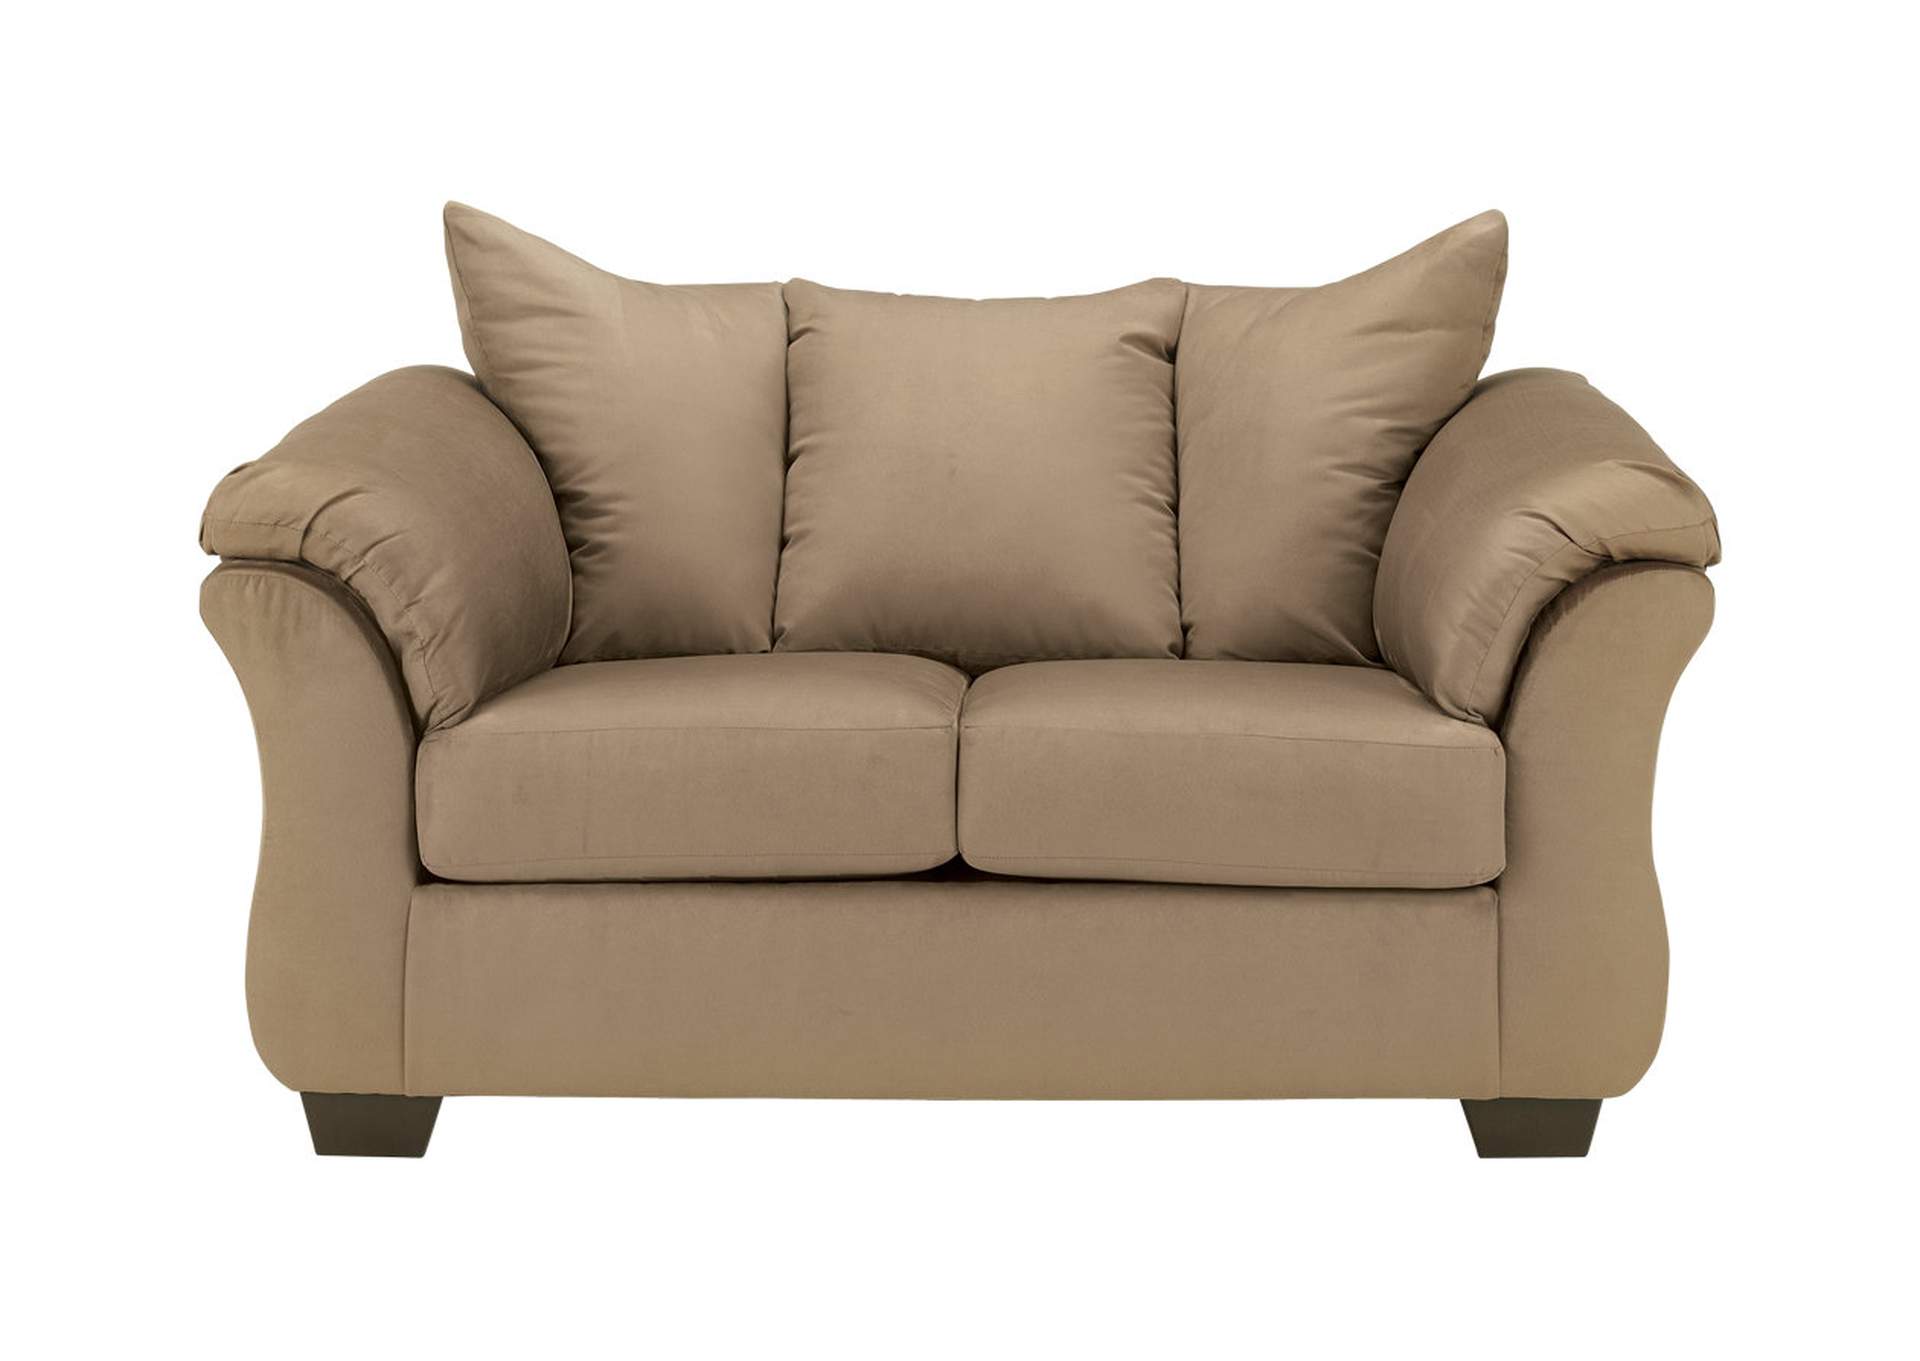 Darcy Sofa and Loveseat,Signature Design By Ashley